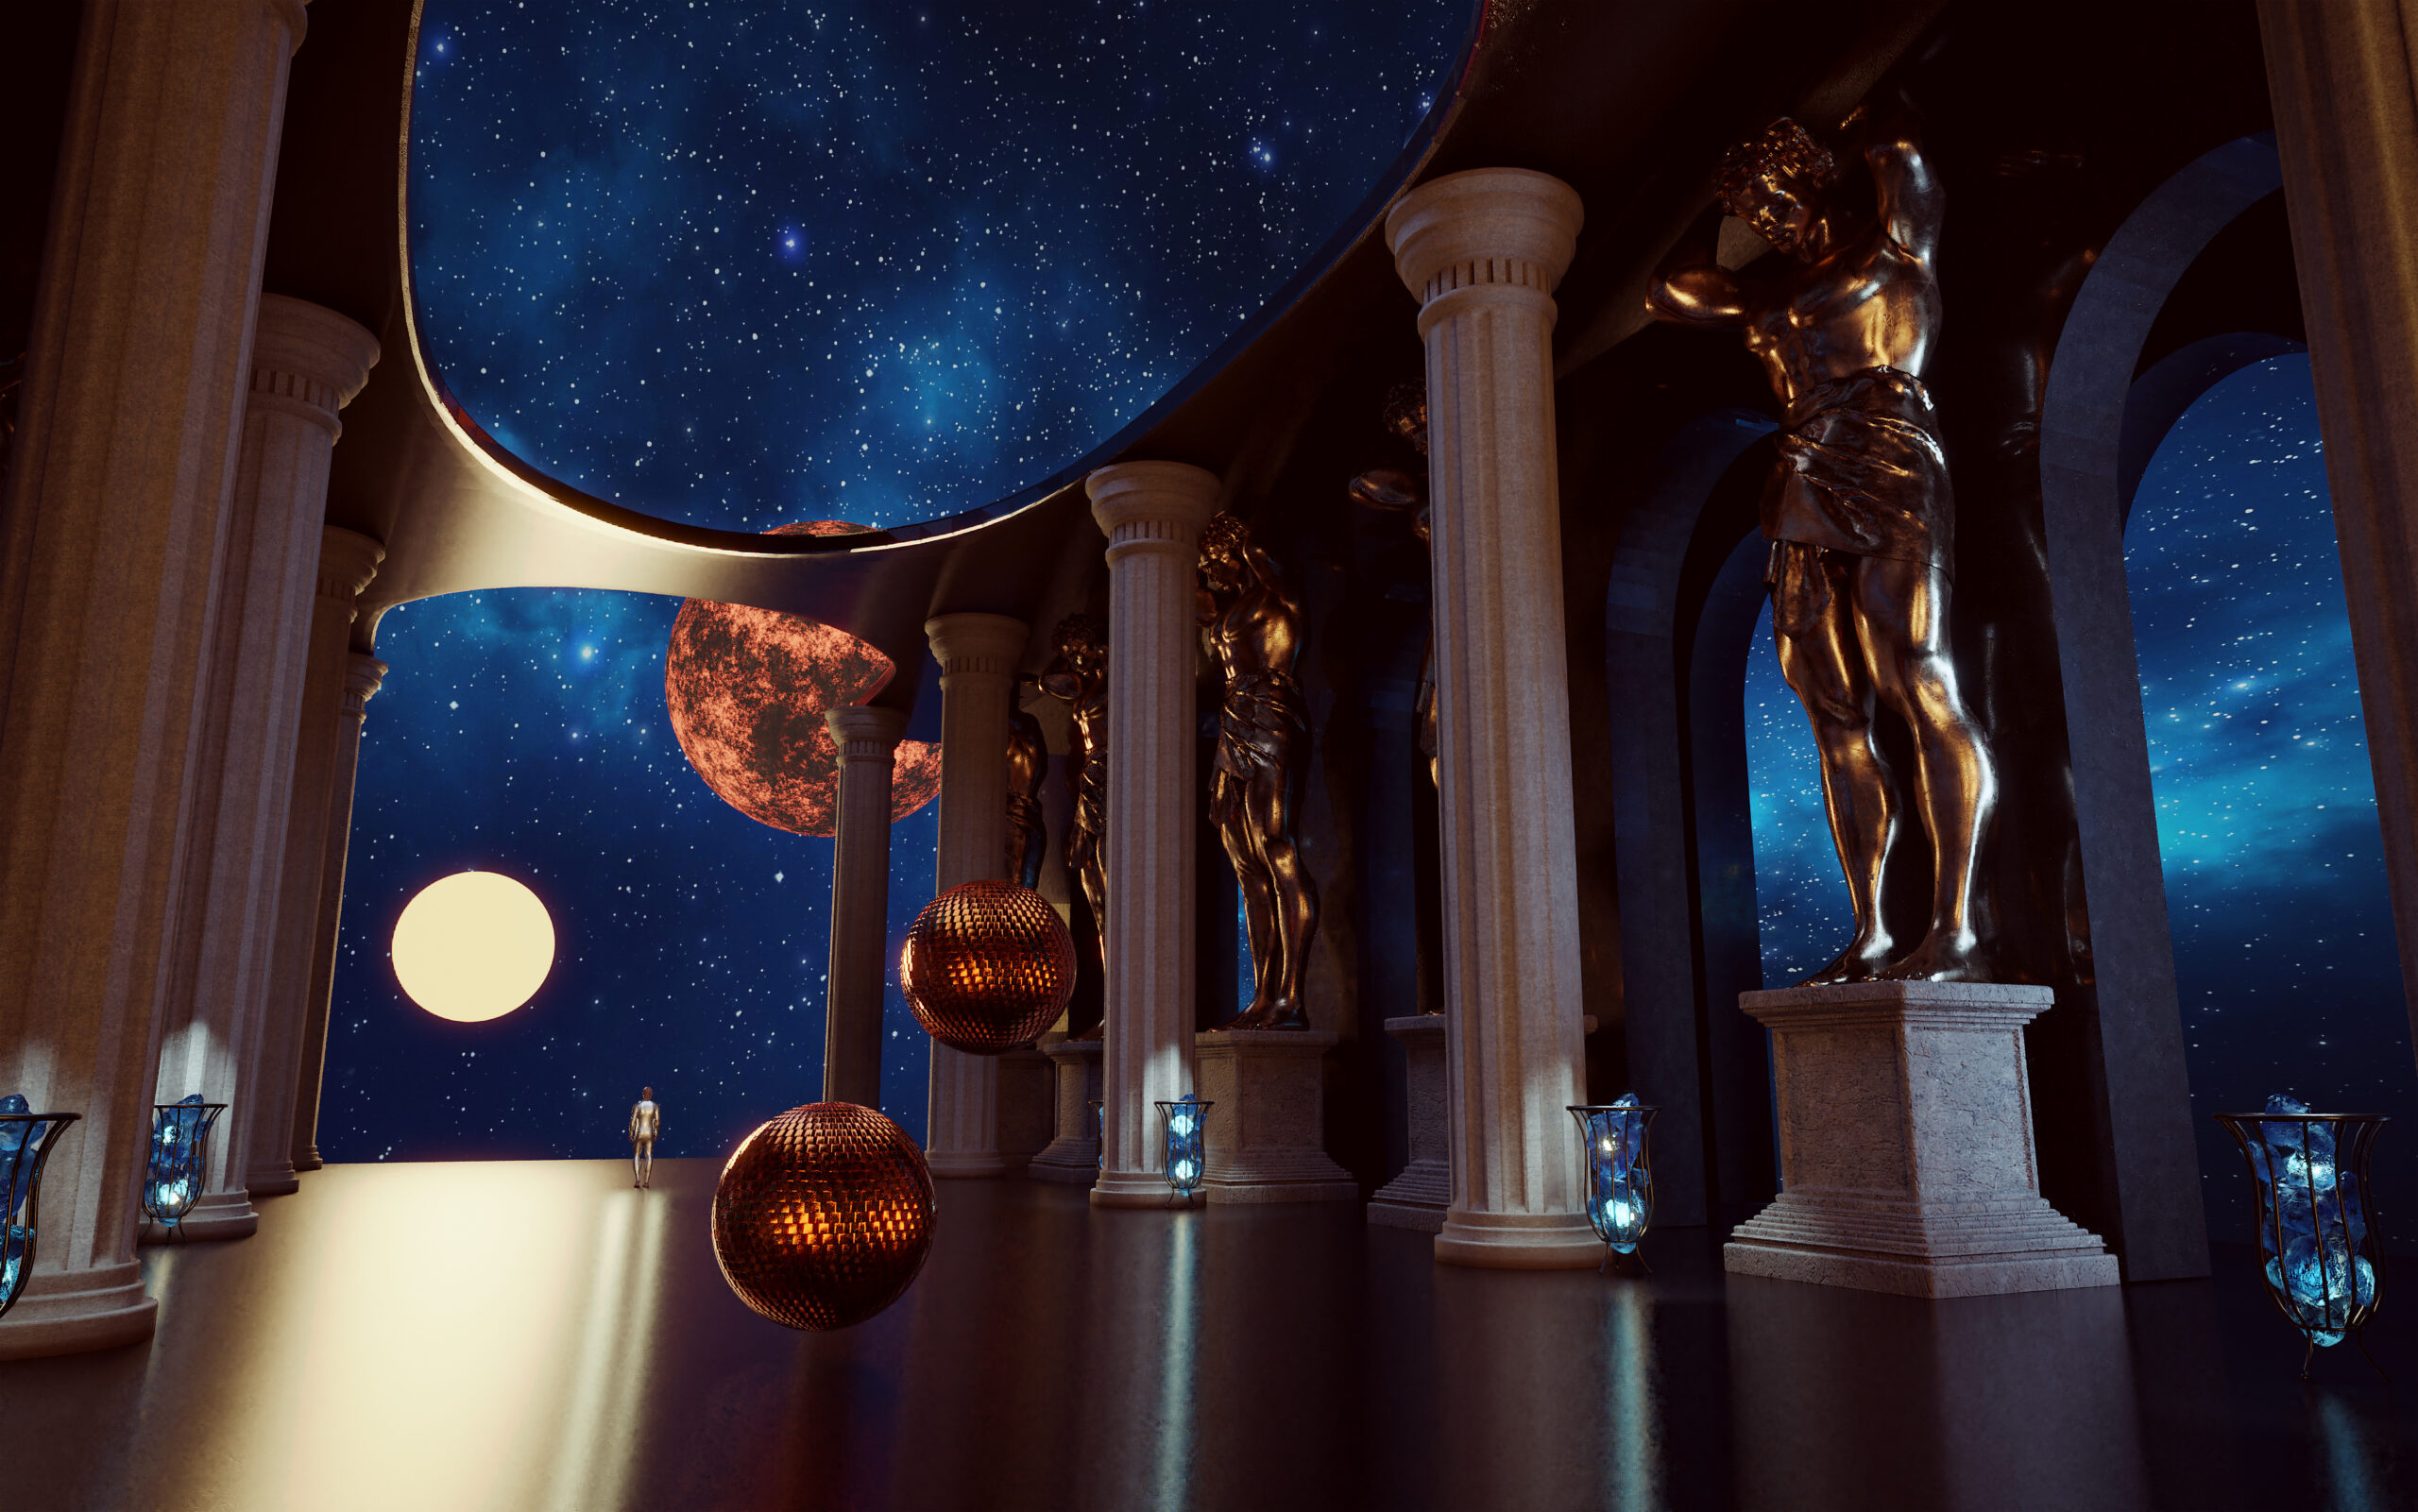 3D rendering scene with sci-fi place in ancient greek style statue and column in star ship hall